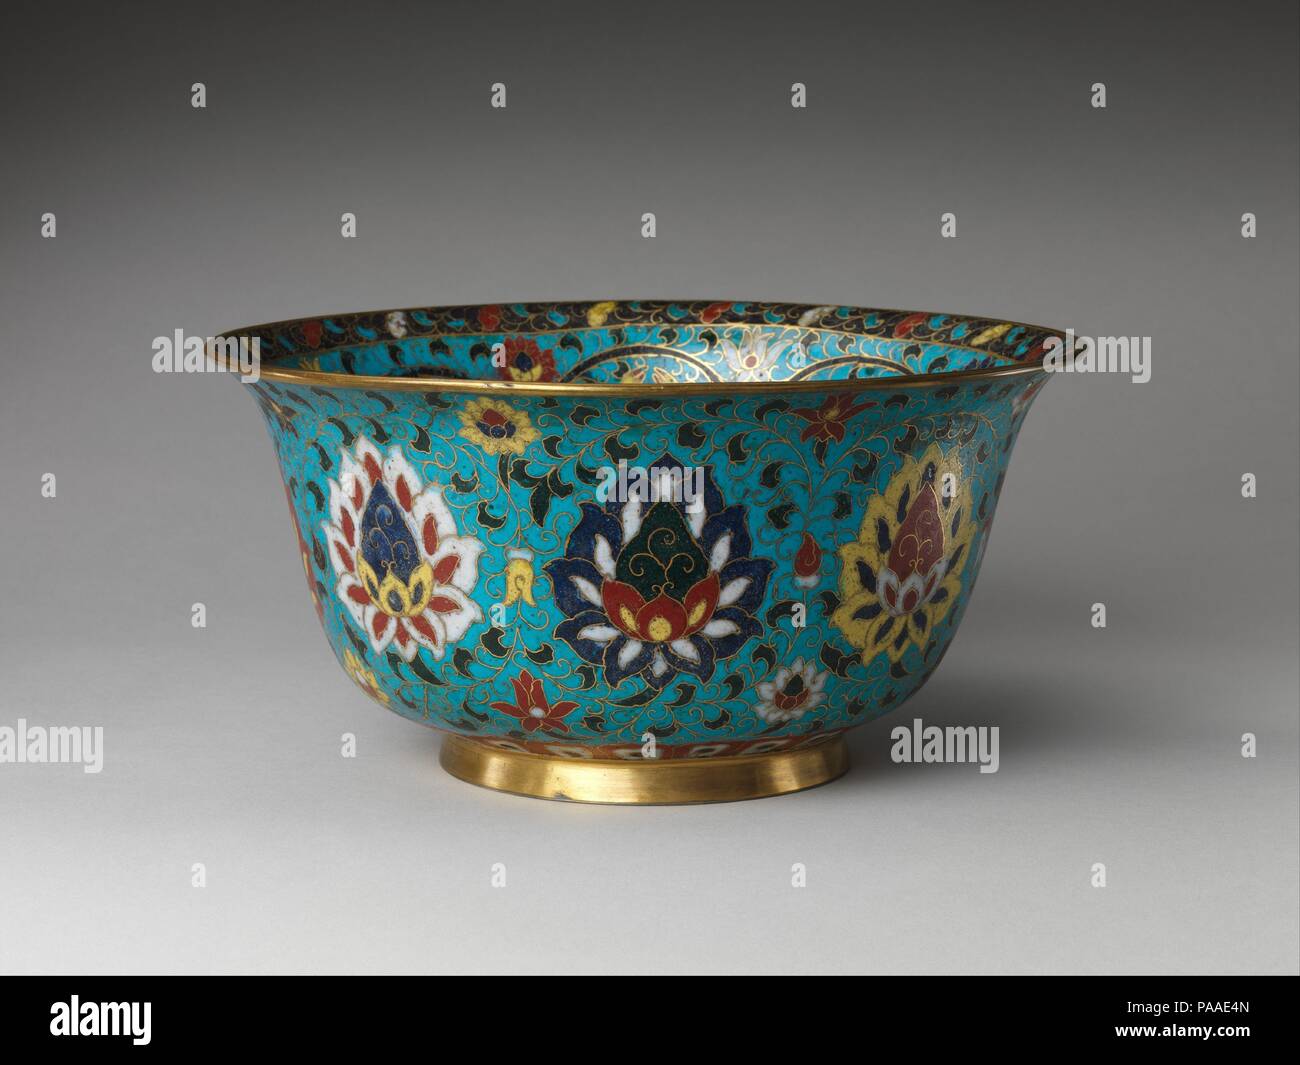 Bowl with the Eight Buddhist Treasures. Culture: China. Dimensions: H. 5 5/8 in. (14.3 cm); Diam. 11 1/2 in. (29.2 cm); Diam. of foot 5 1/2 in. (14 cm). Date: 16th century.  The objects supported by lotus stands at the center of this bowl illustrate a traditional grouping of eight 'treasures'--among them an endless knot, a banner or flag, a conch shell, and a pair of fish--that were introduced with Buddhism and are often found in the later decorative arts. Here, the fish are repeated at the bottom of the bowl, while lotus blossoms, Buddhist symbols of purity, decorate the exterior. The prevale Stock Photo